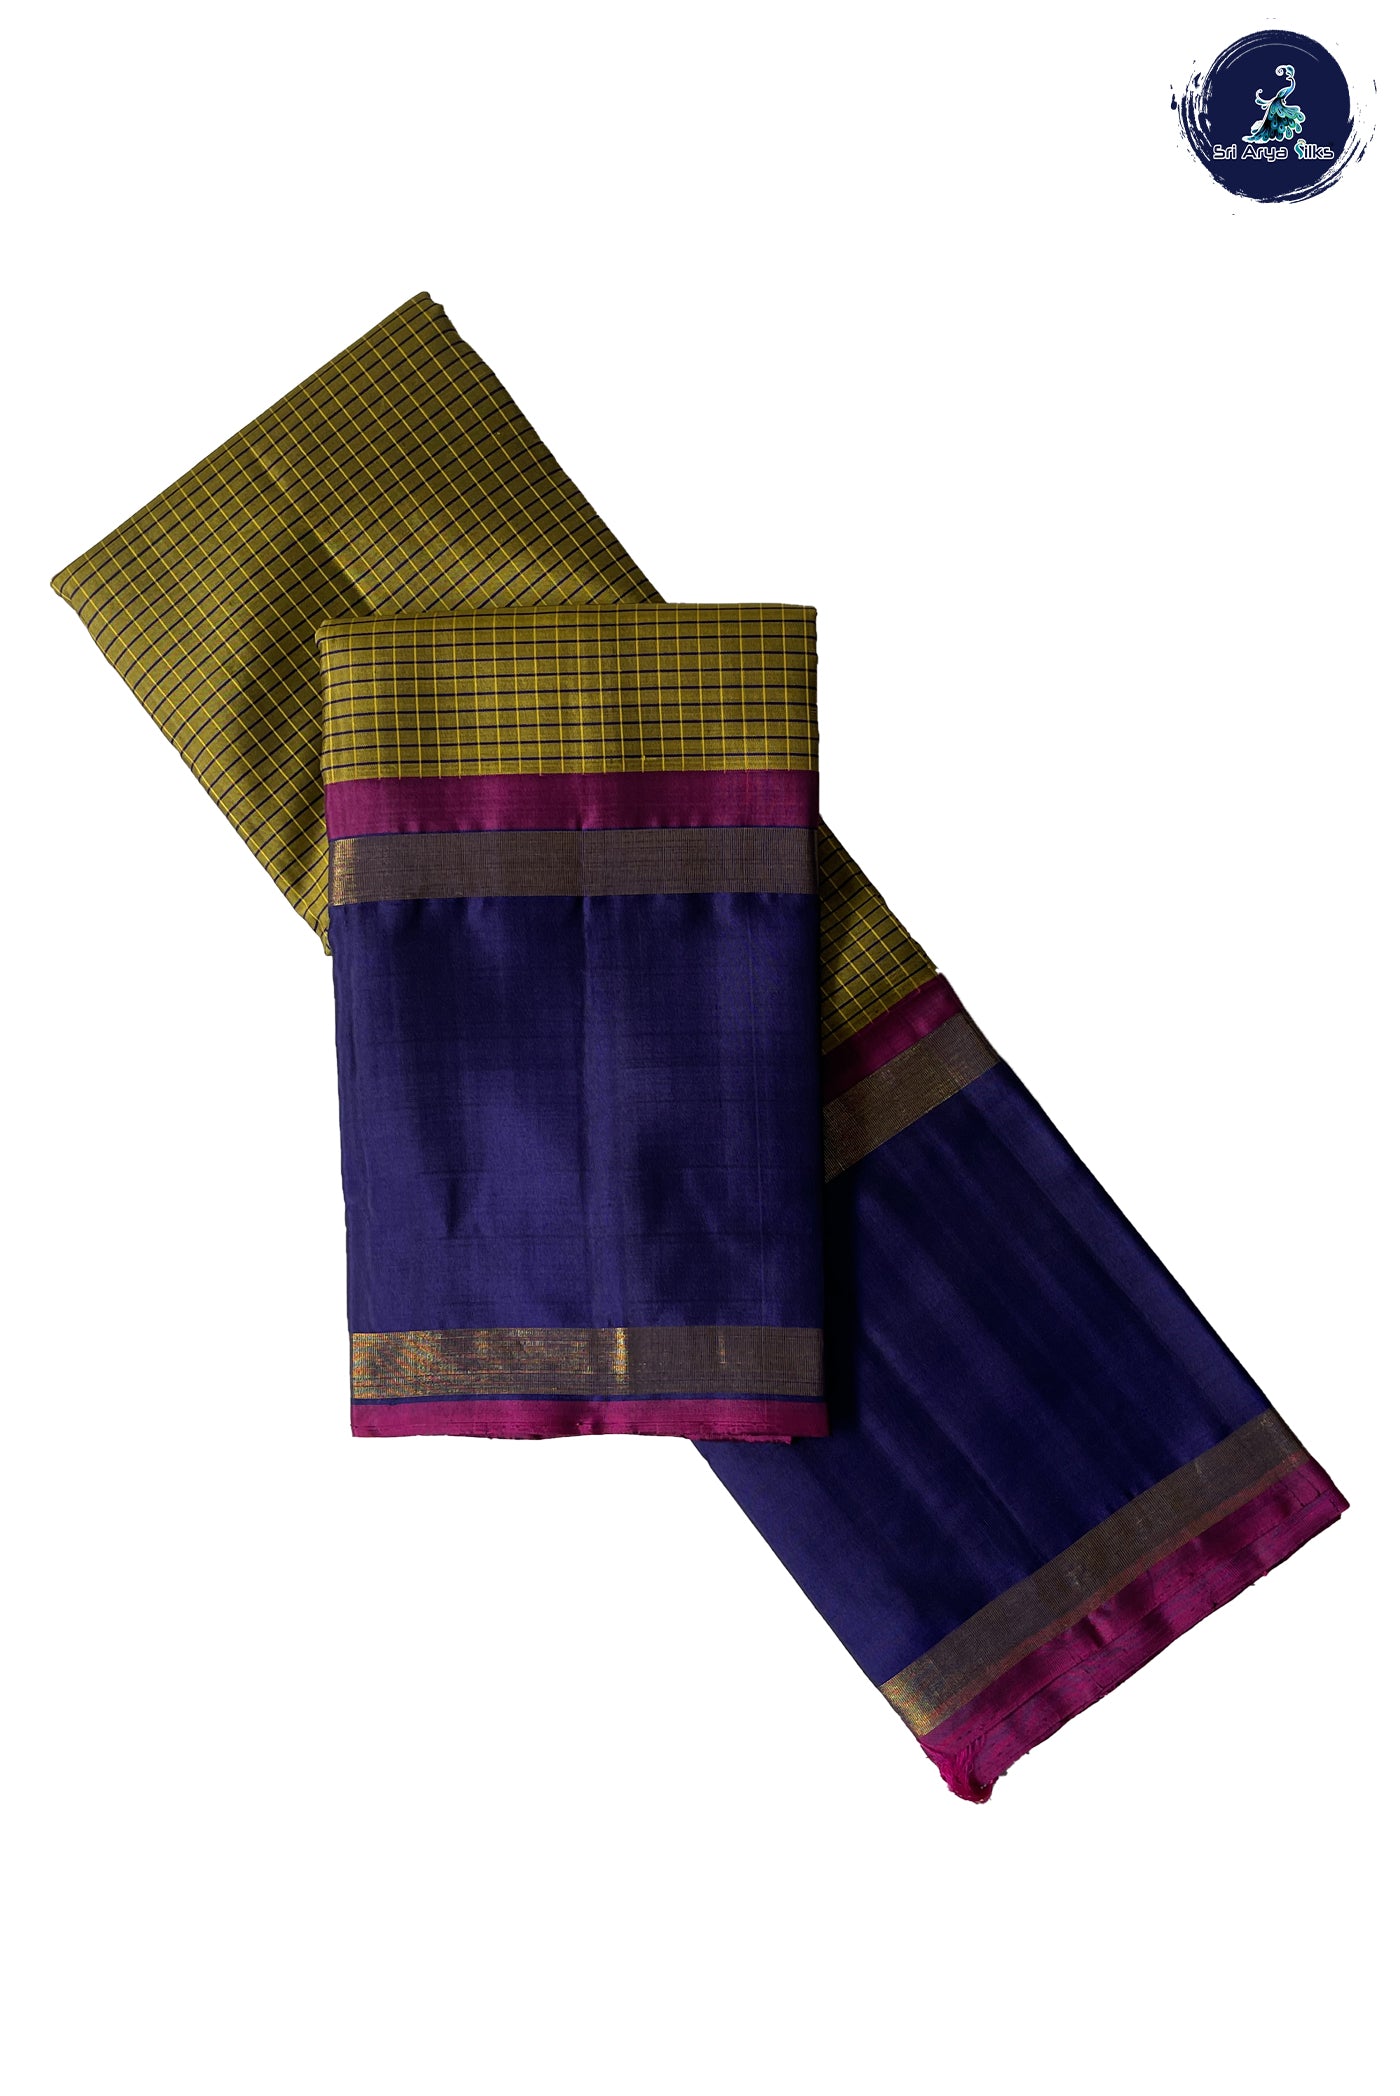 Paasiparupu Green Light Weight Silk Saree With Checked Pattern